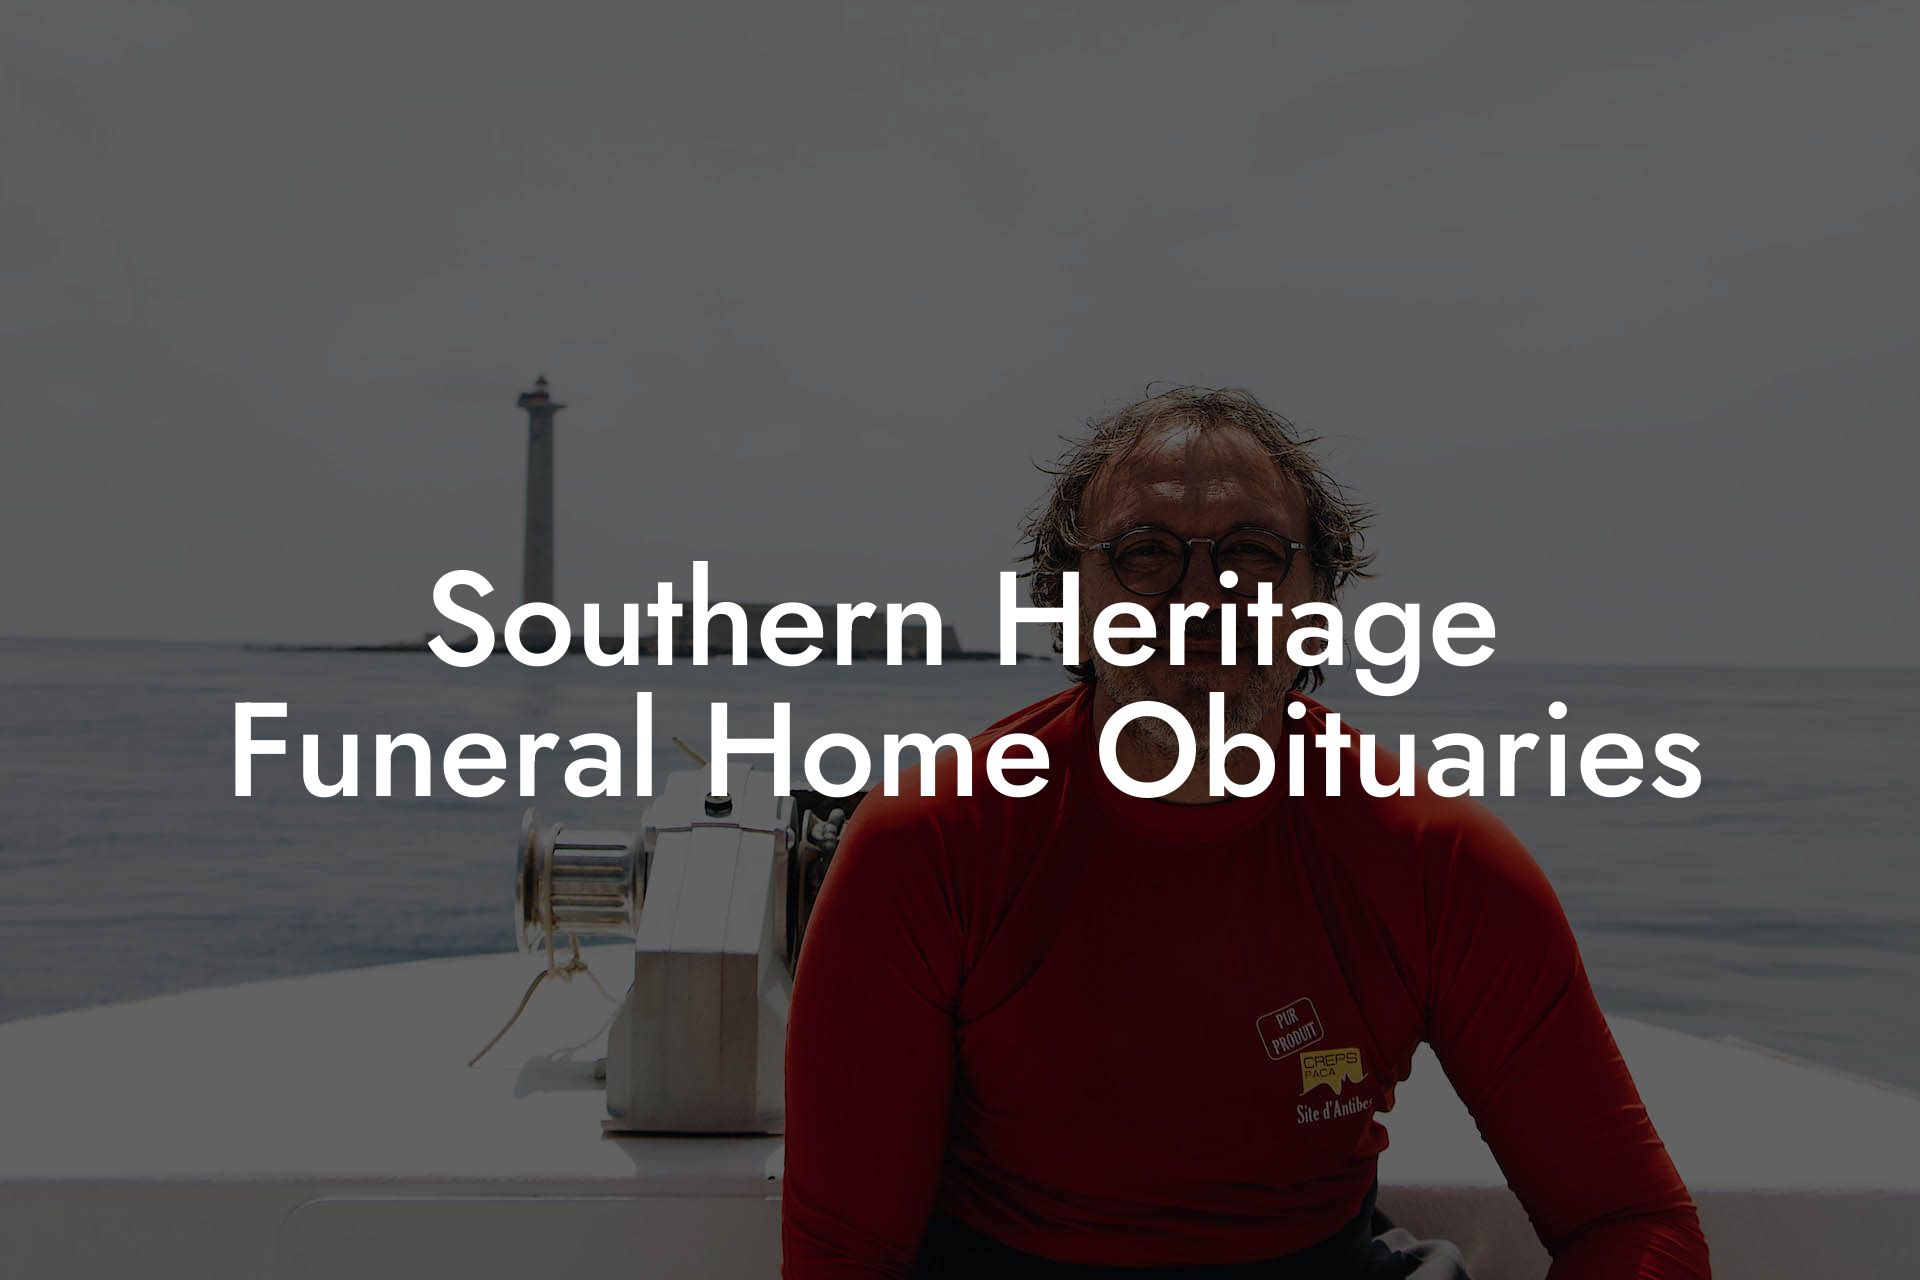 Southern Heritage Funeral Home Obituaries